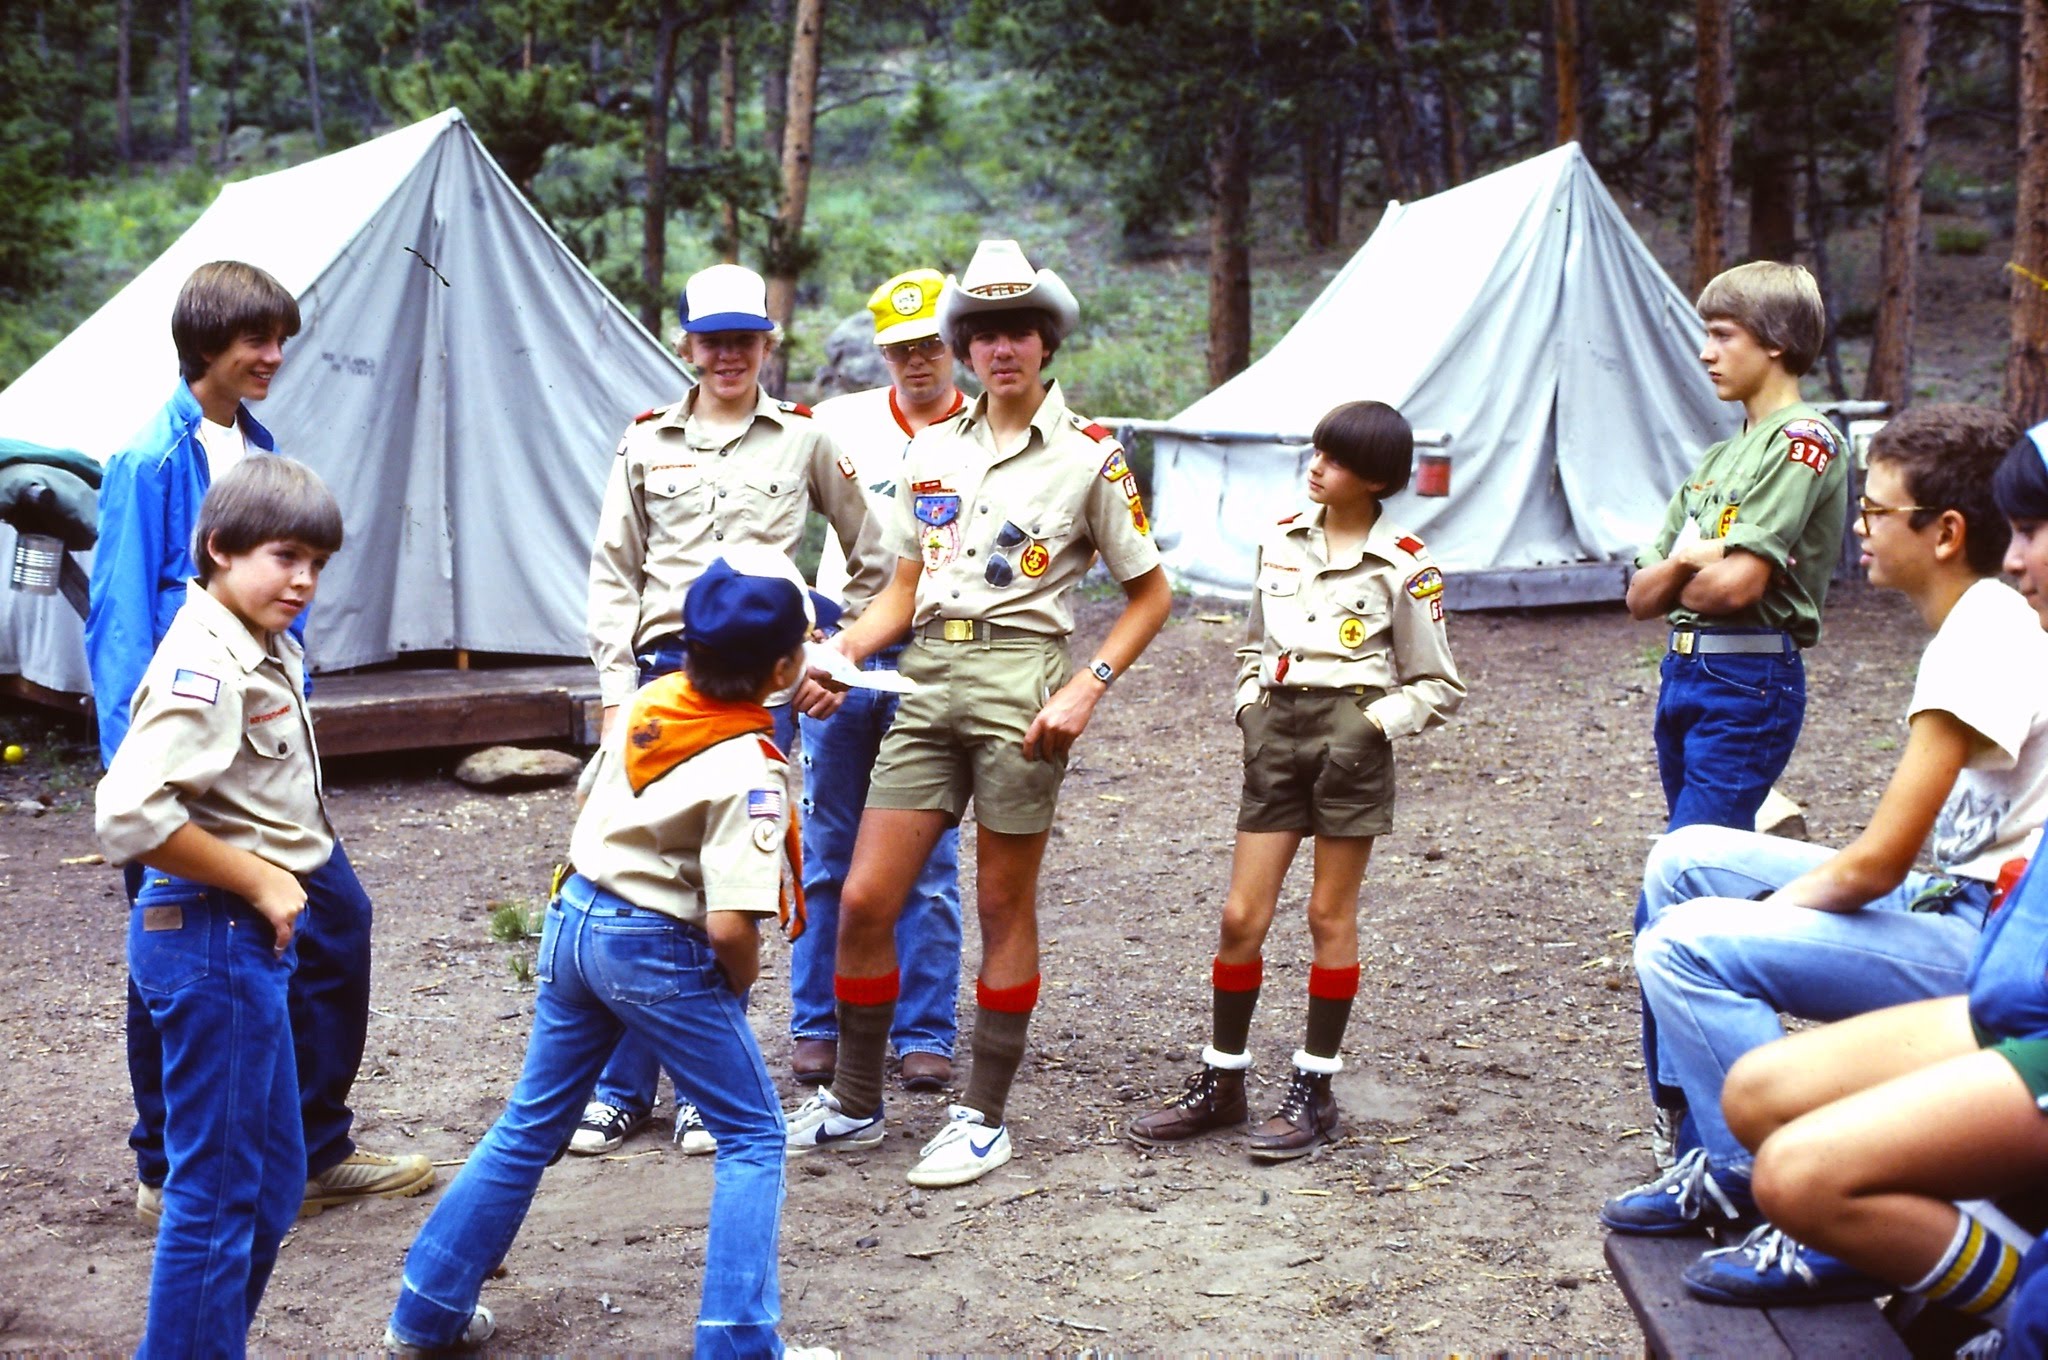 David Limiero as a young leader at Boy Scout Camp, surrounded by younger Scouts